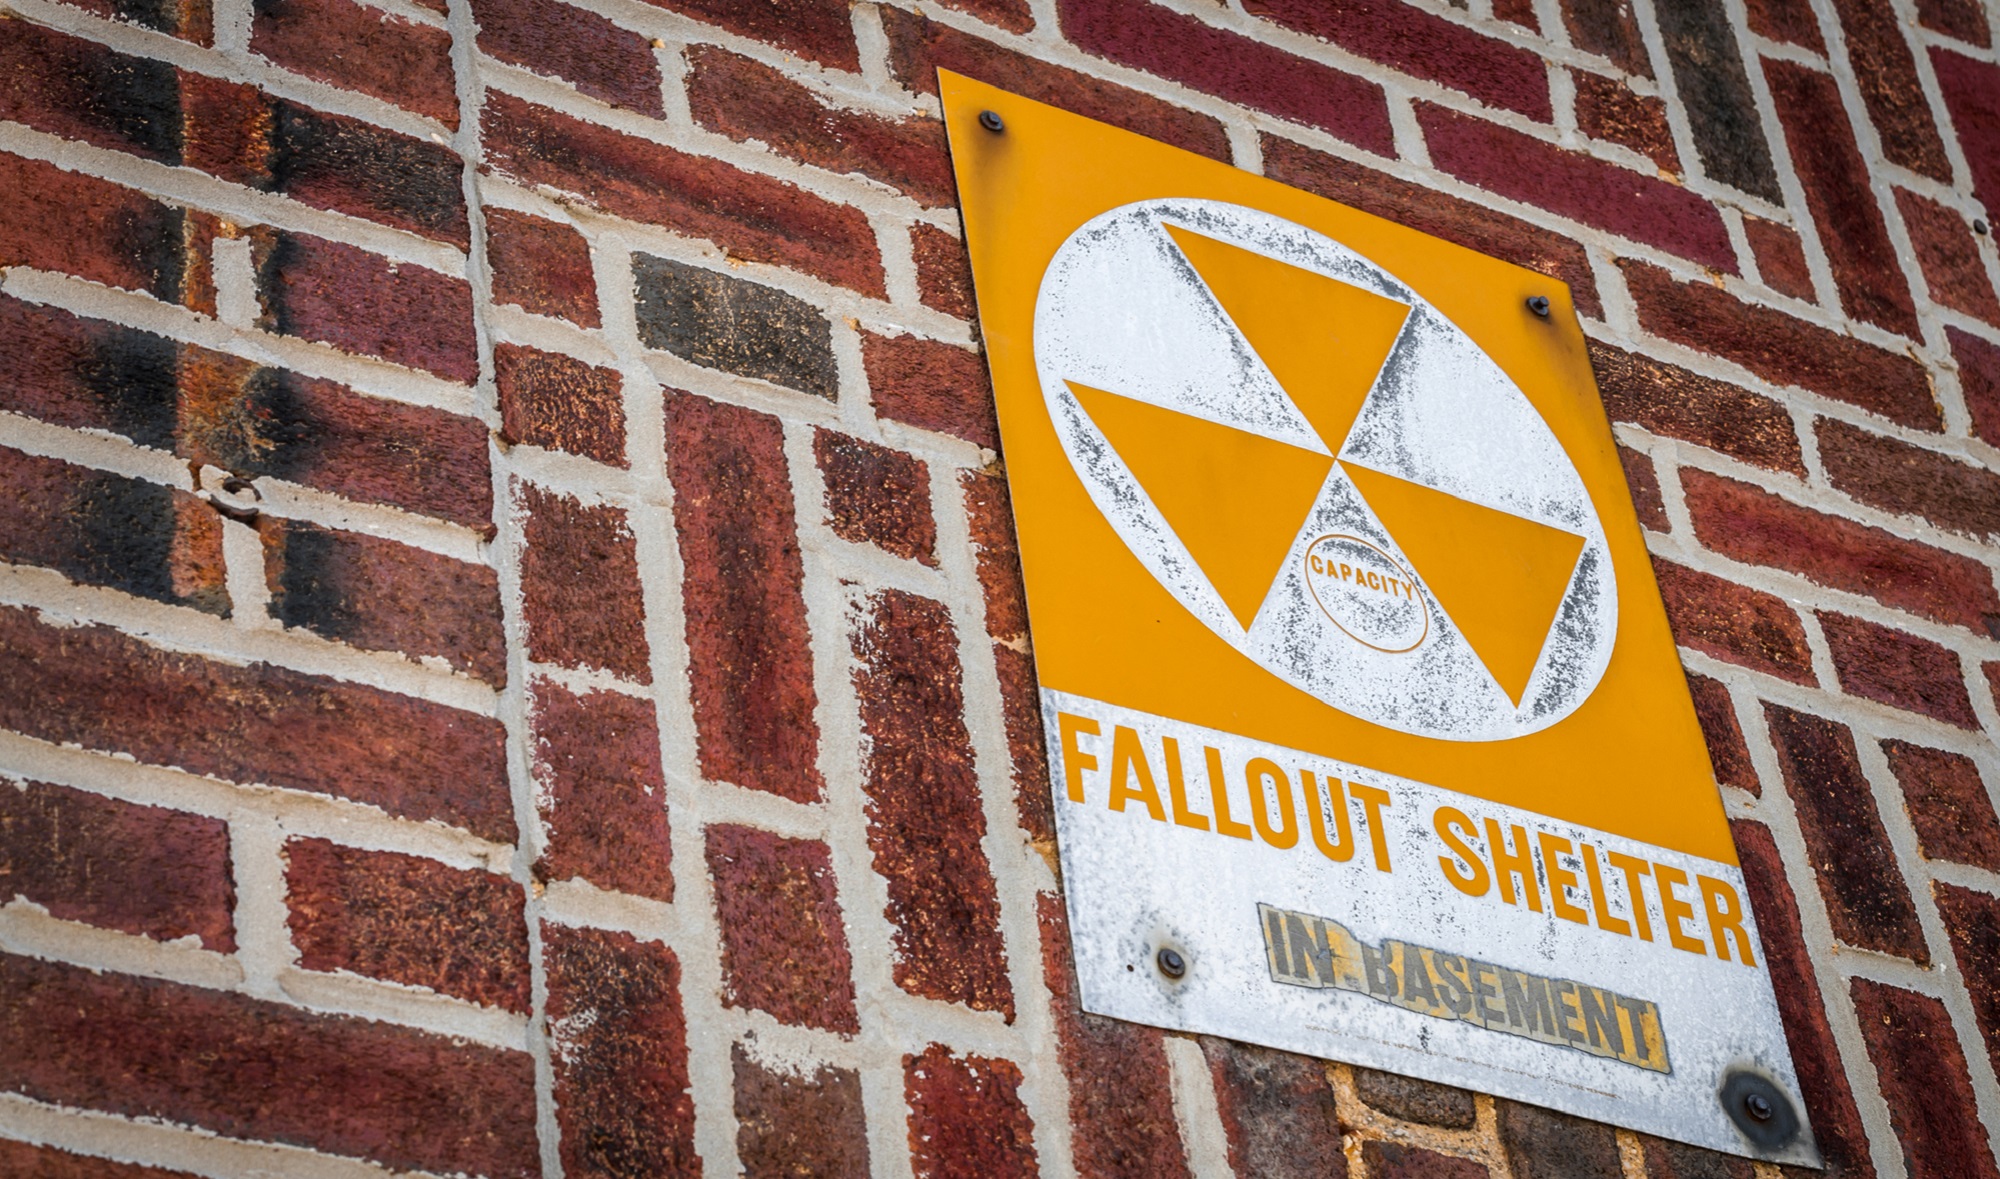 Nuclear shelter basement sign on brick building to represent survival tips for a nuclear blast